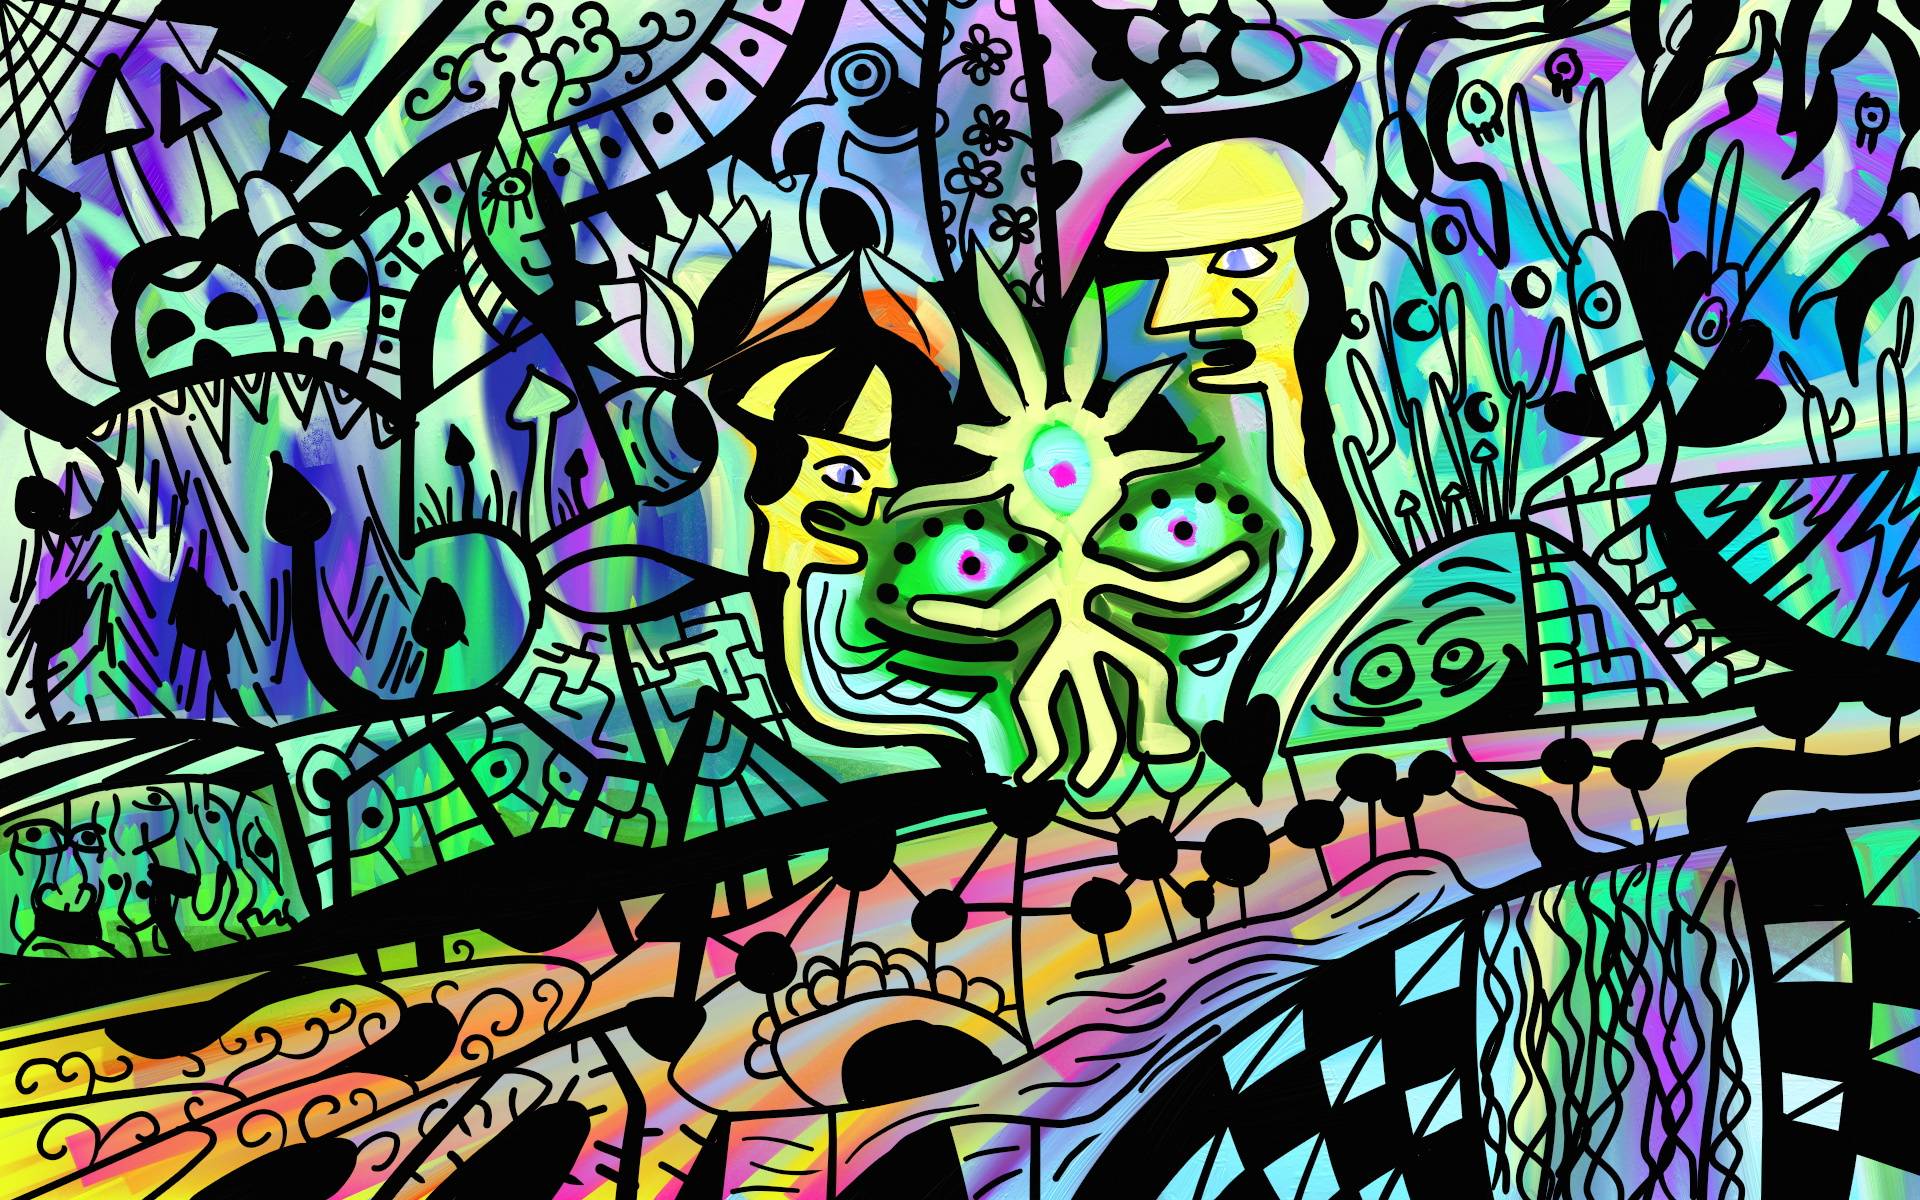 What is psychedelic art?